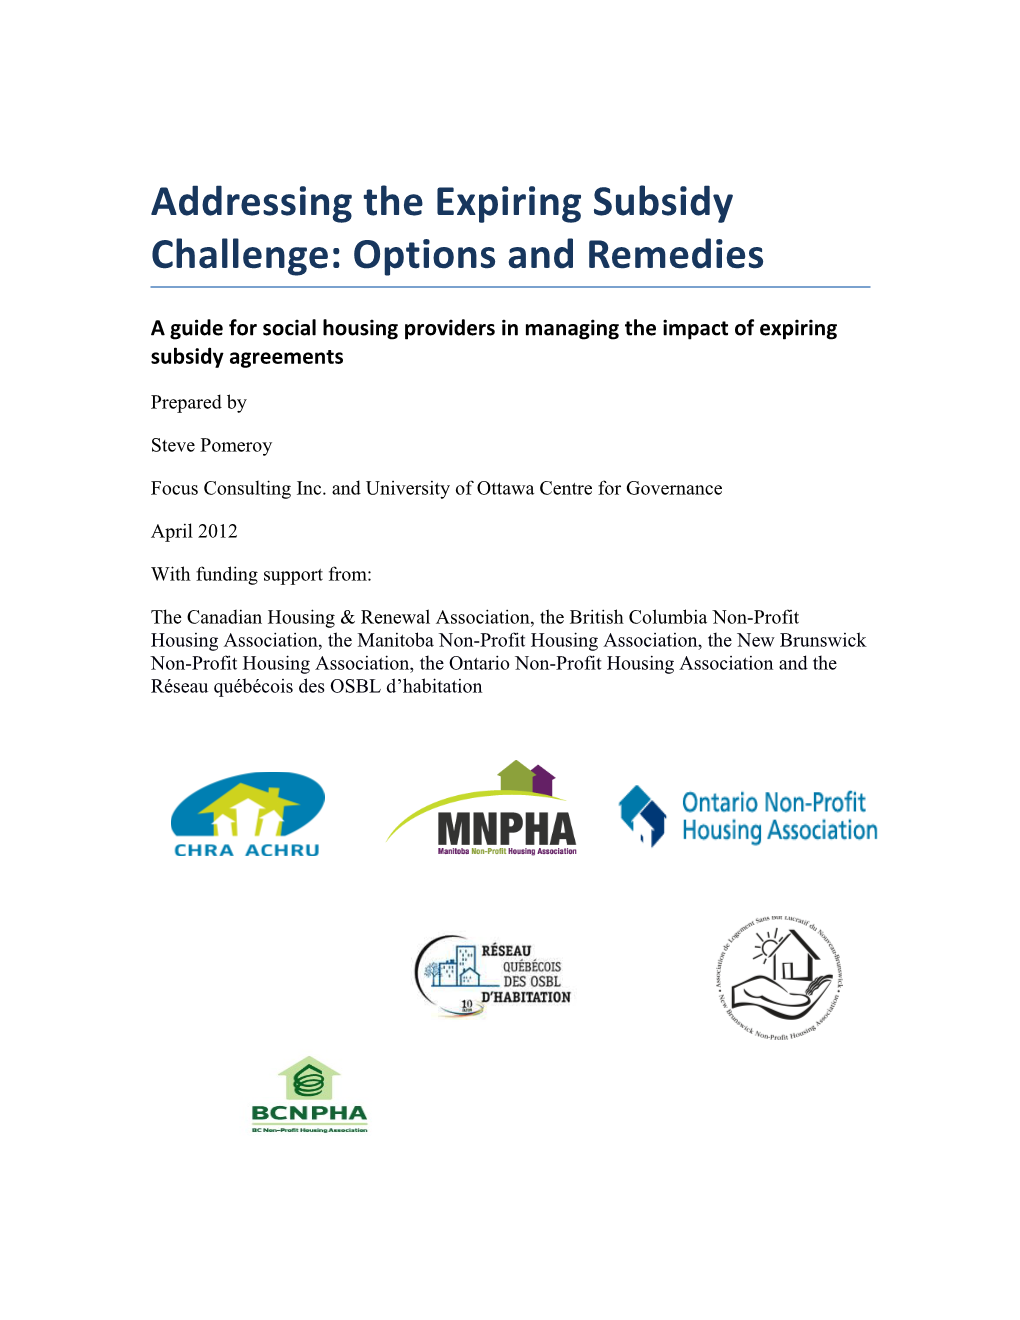 A Guide for Social Housing Providers in Managing the Impact of Expiring Subsidy Agreements